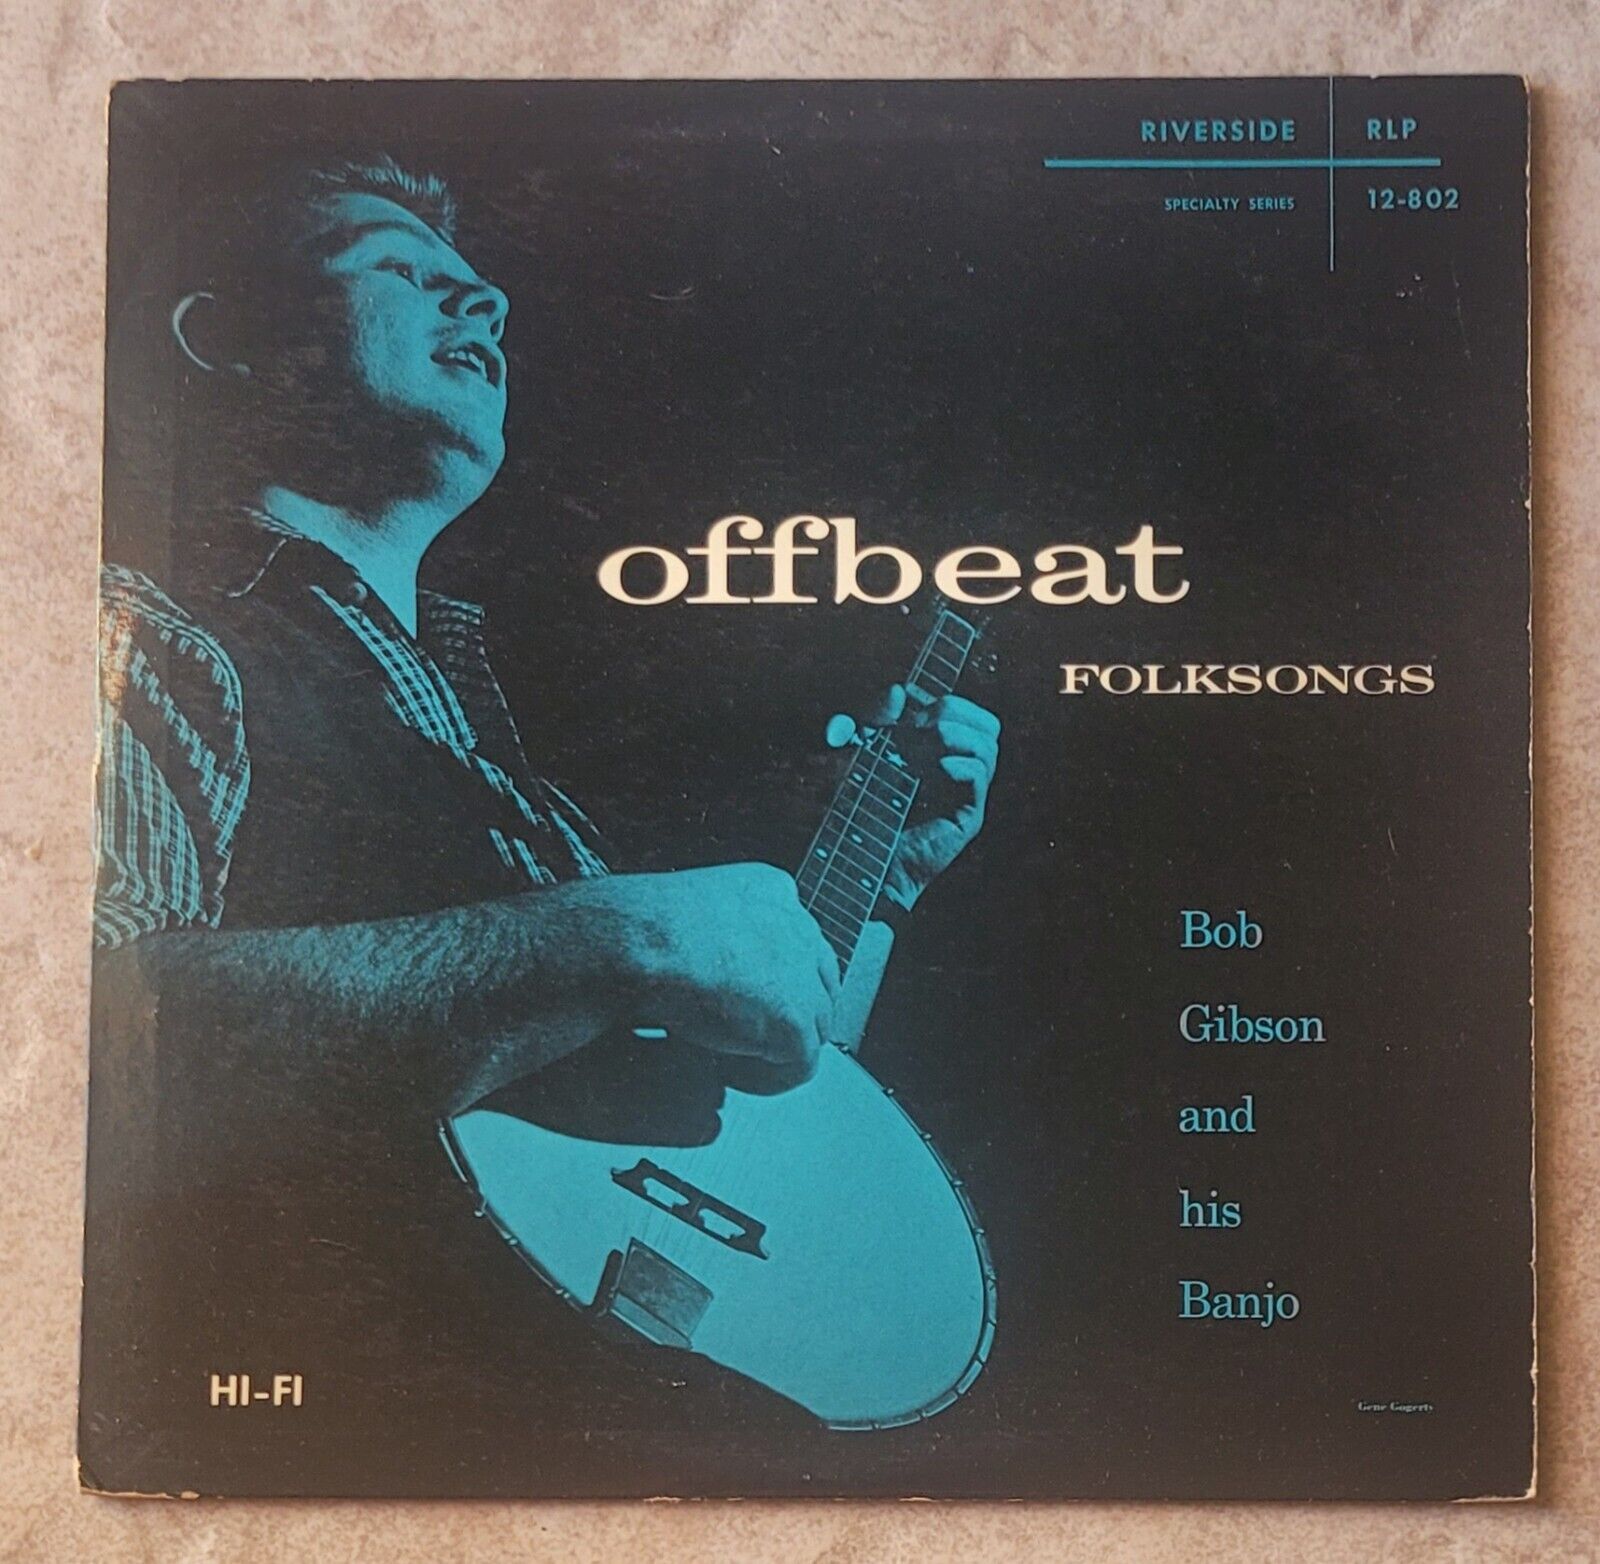 Offbeat Folksongs Bob Gibson and his banjo Riverside Folk Roots LP FAST SHIPPING